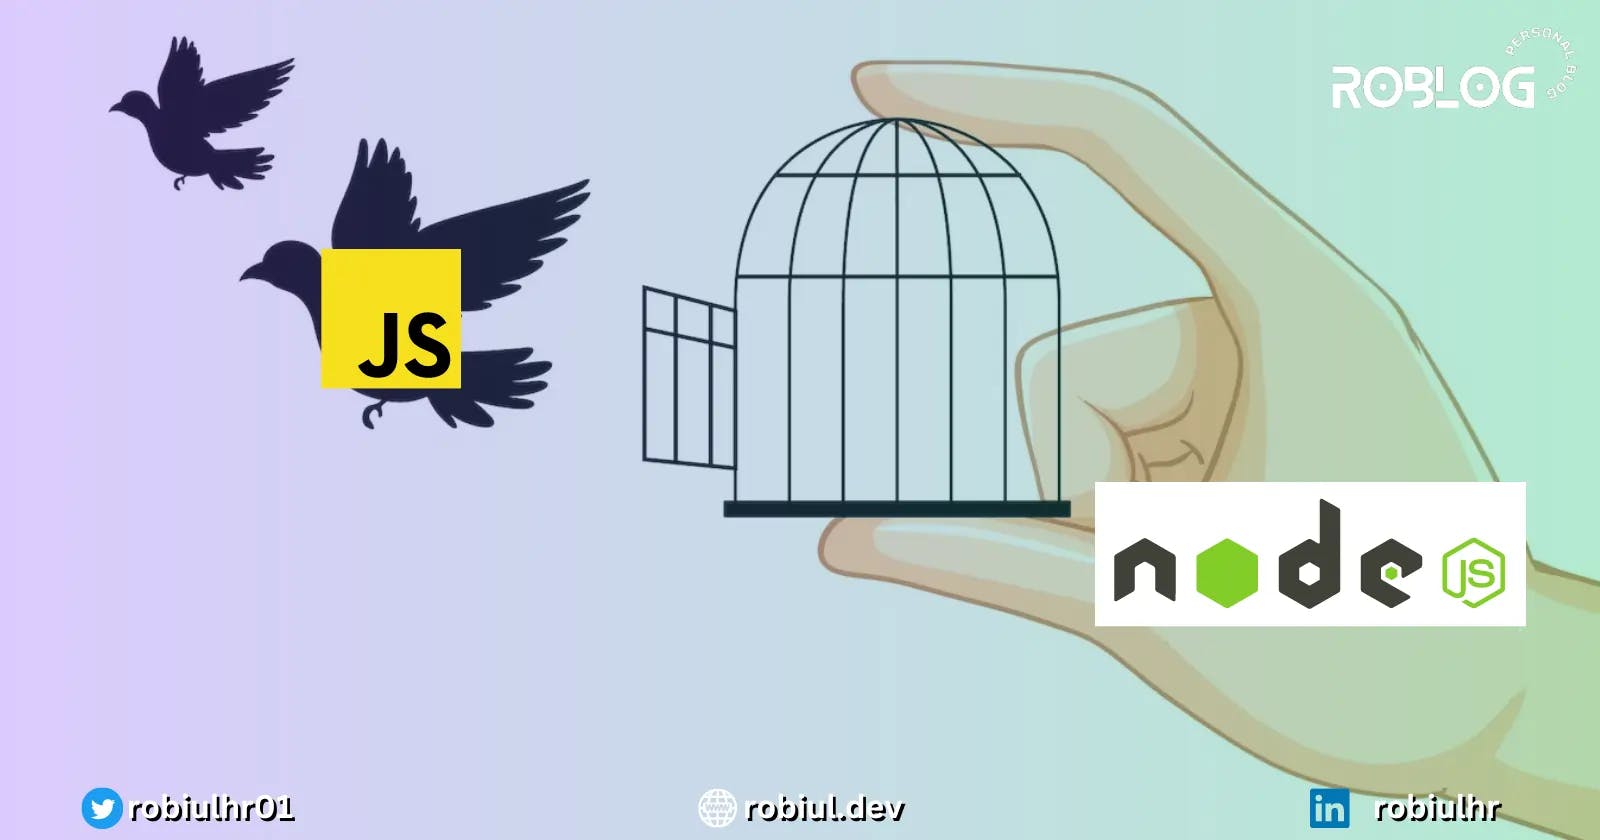 Node.js has set JavaScript free from the confines of the browser, breaking it out of its cage and unleashing its power for server-side development.